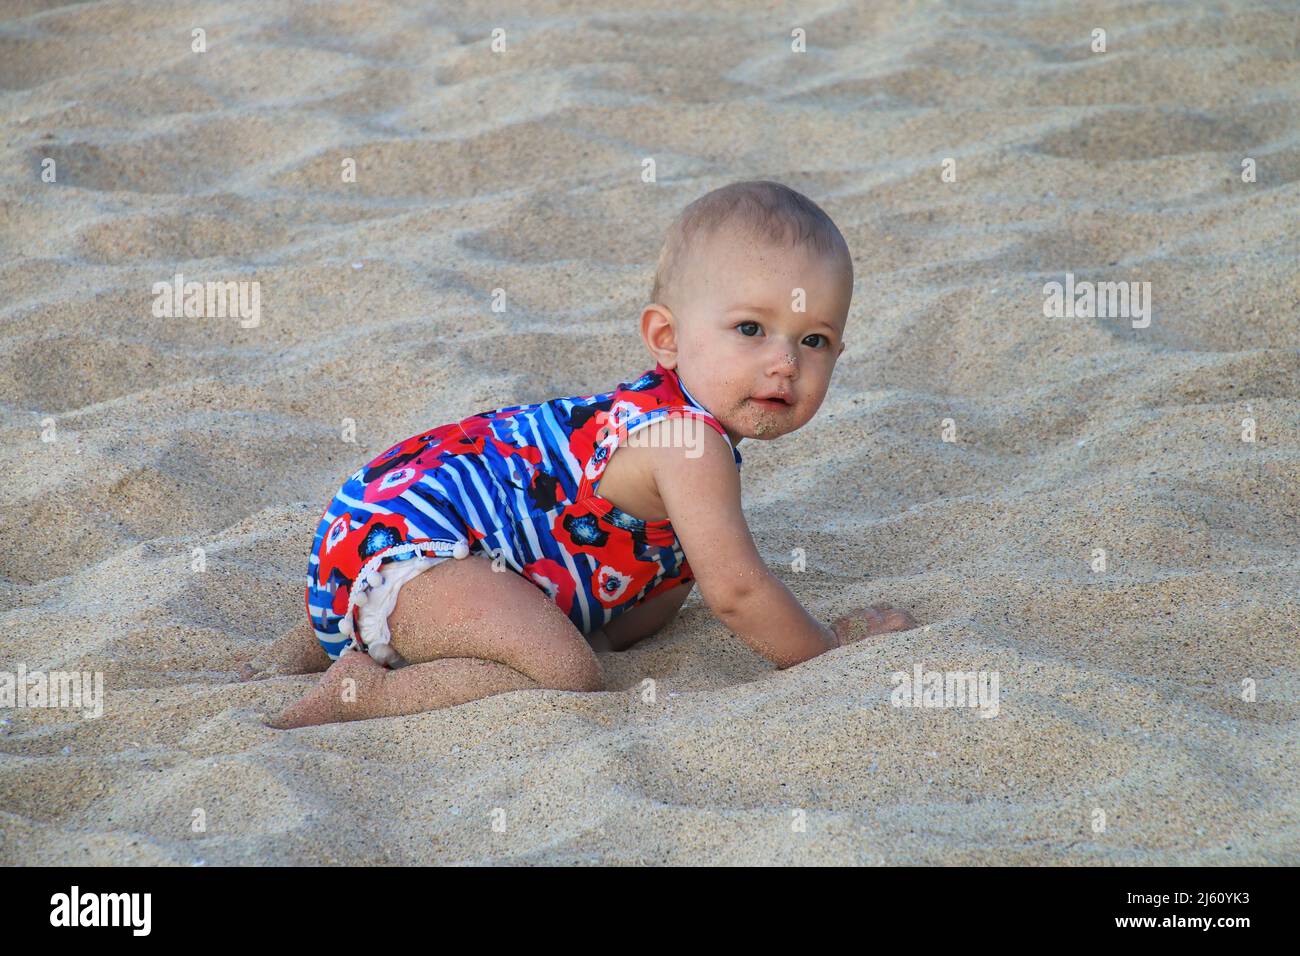 Baby girl crawling in a soft beach sand Stock Photo